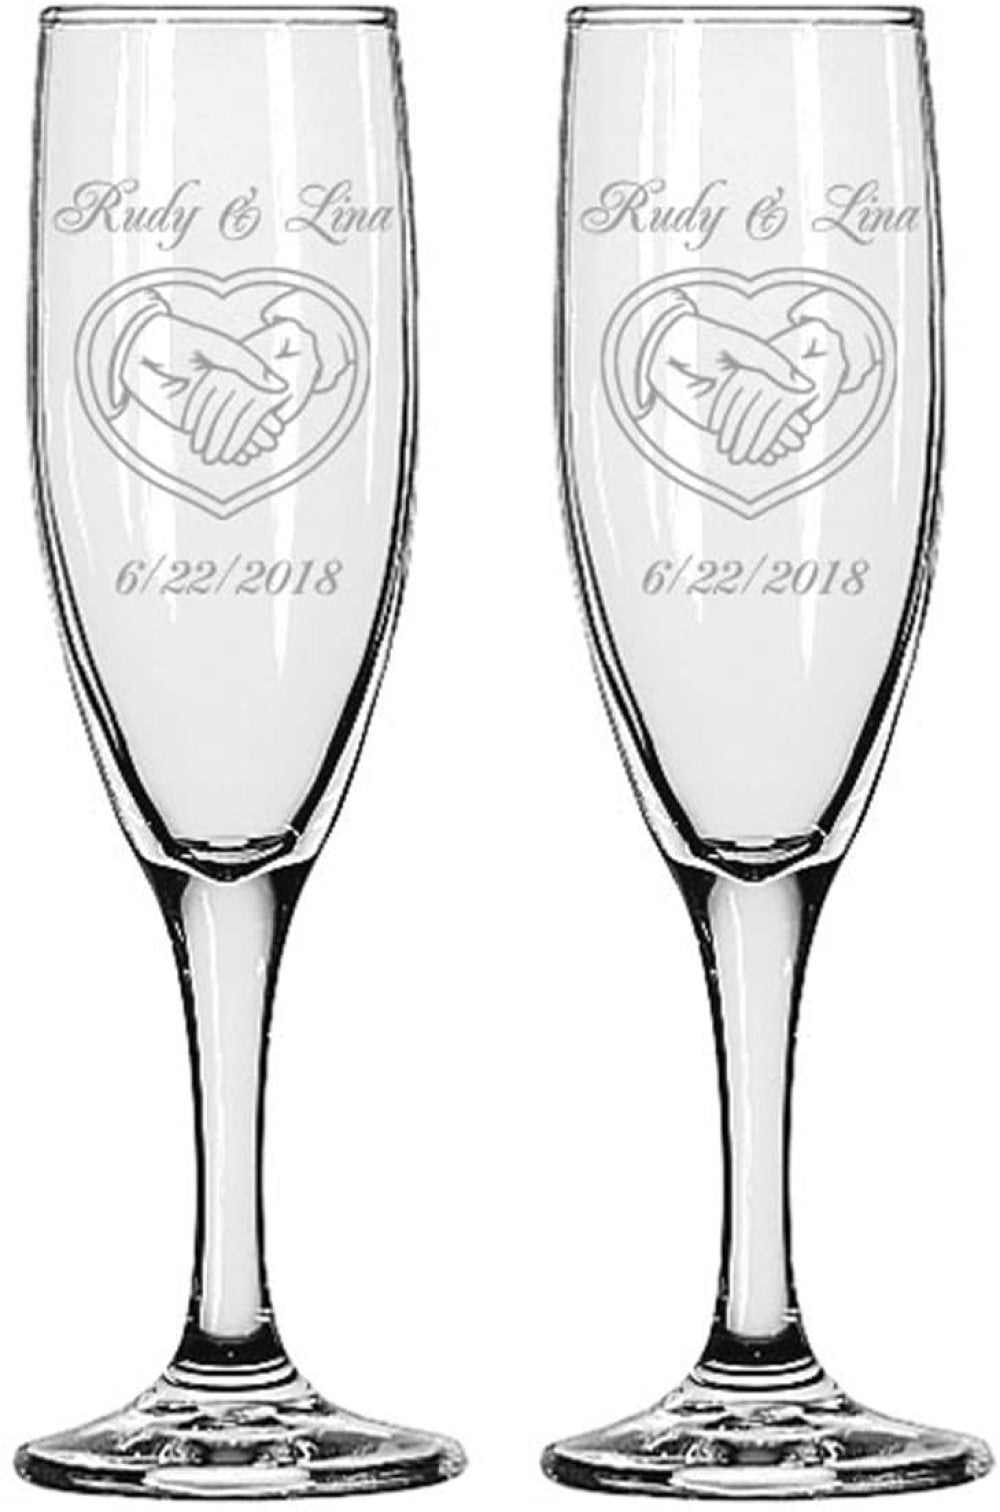 Interlock Heart Gifts Infinity Engraved Wedding Interlock Hearts Champagne Flutes Set of 2 Personalized Toasting Glasses 